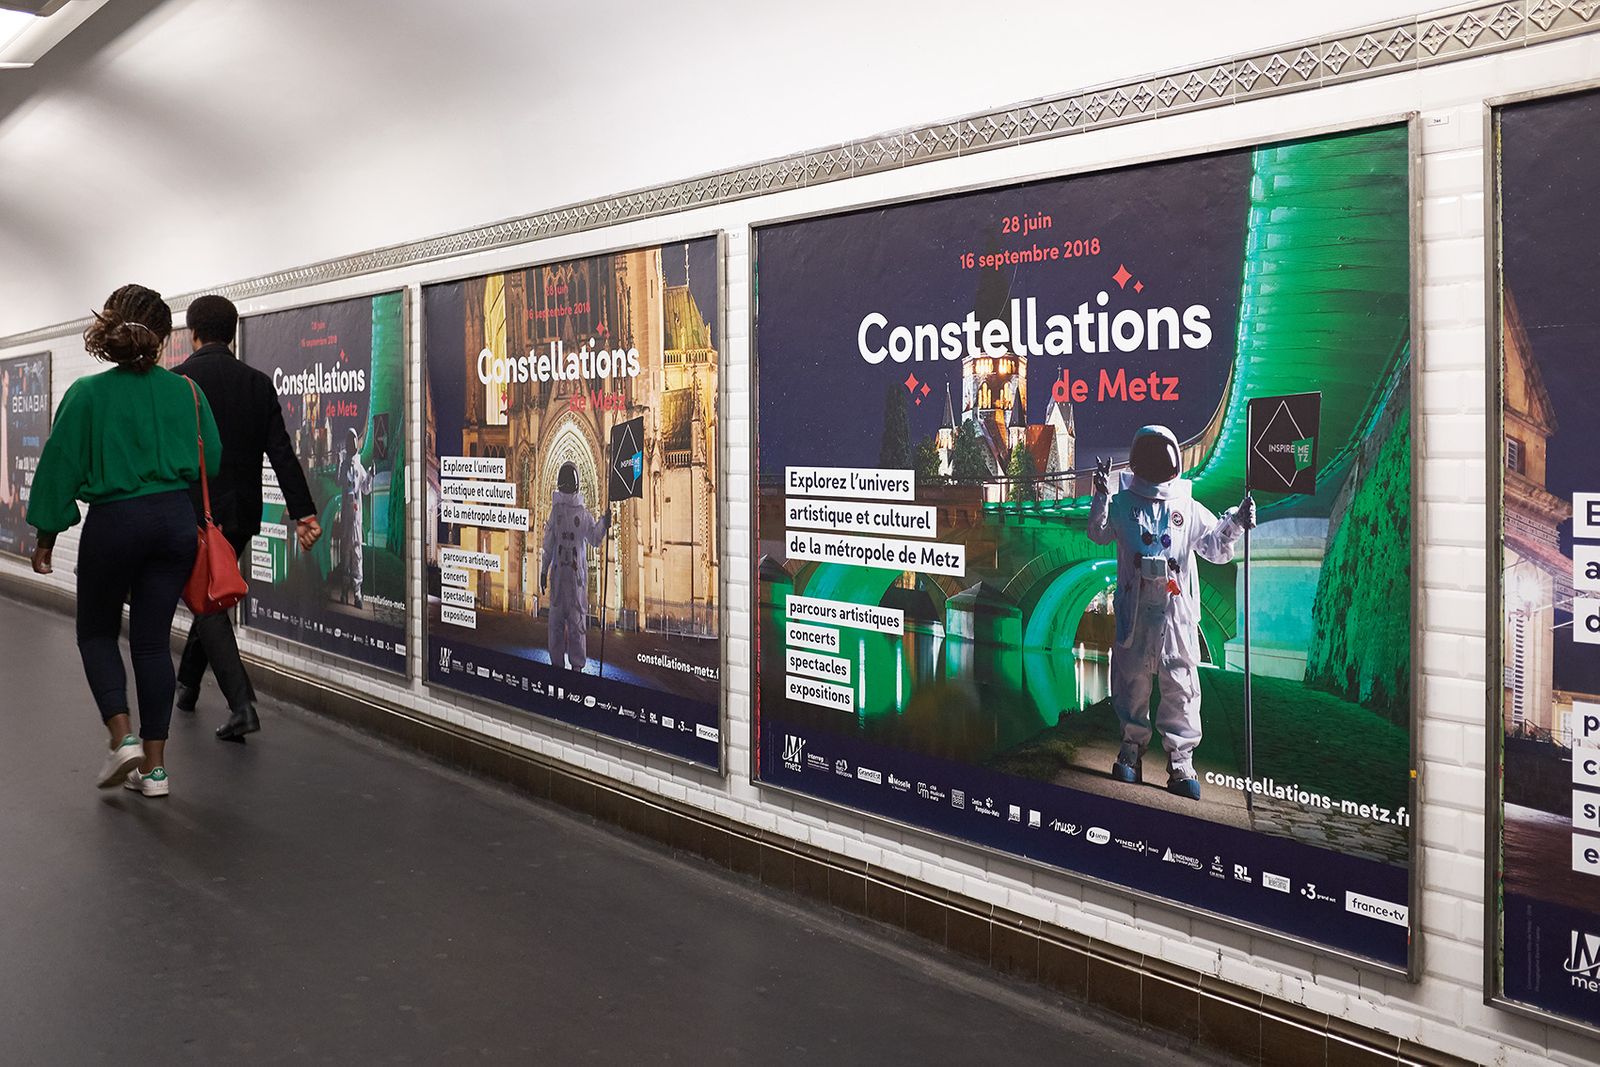 Campaign for the cultural event "Constellations de Metz" in the subway of Paris